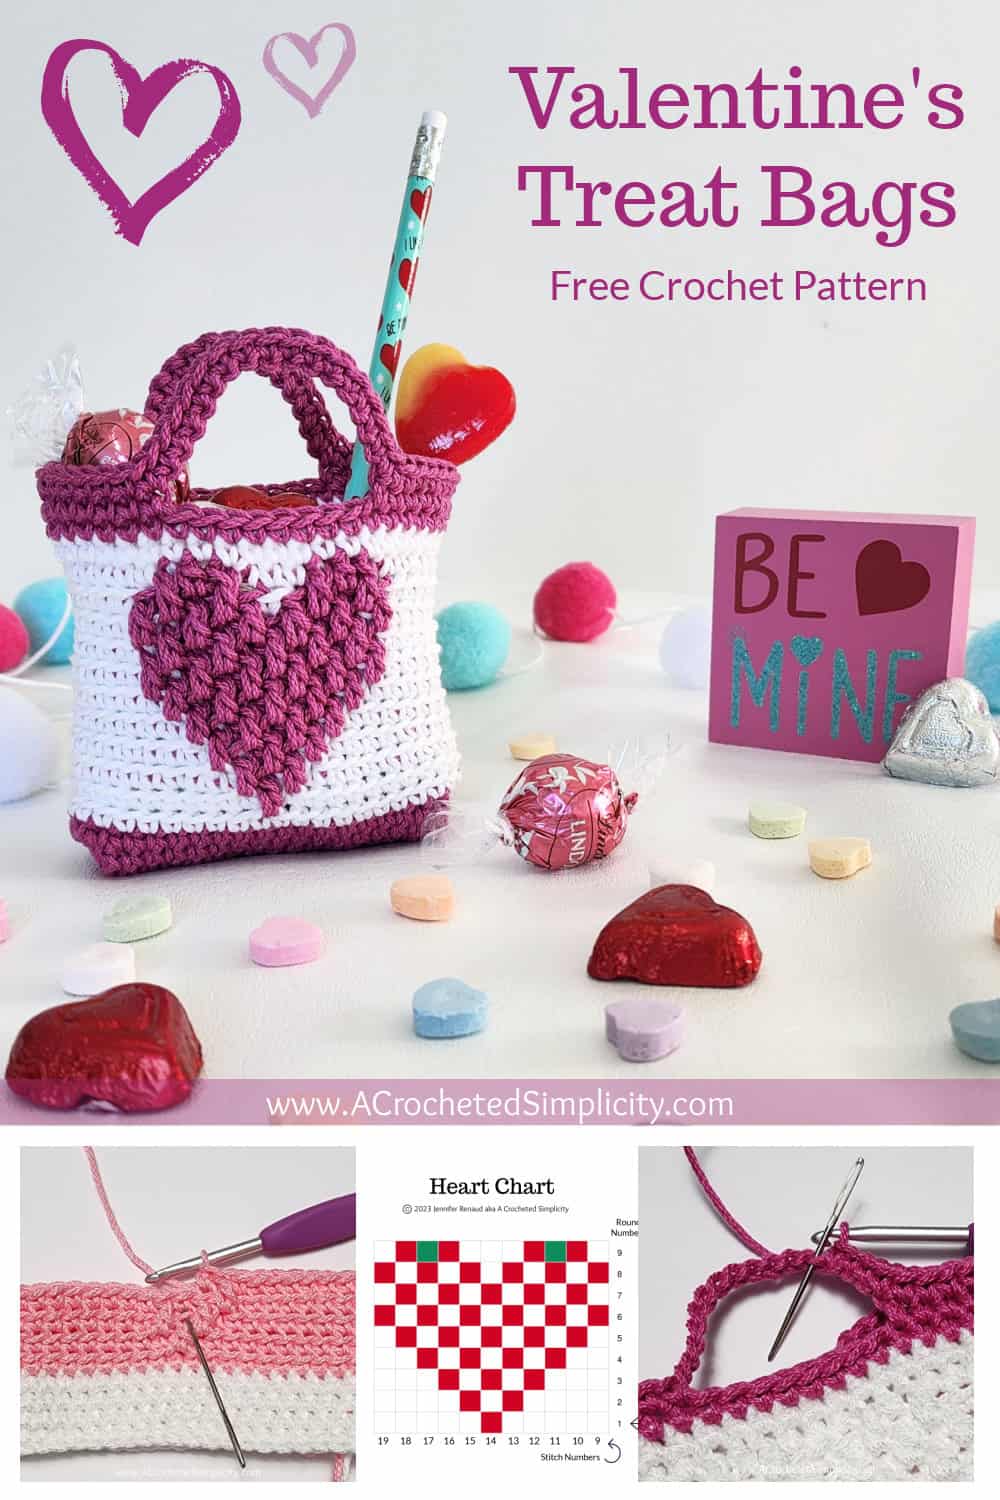 Pinterest graphic for valentines treat bags with heart chart and tutorial pictures.